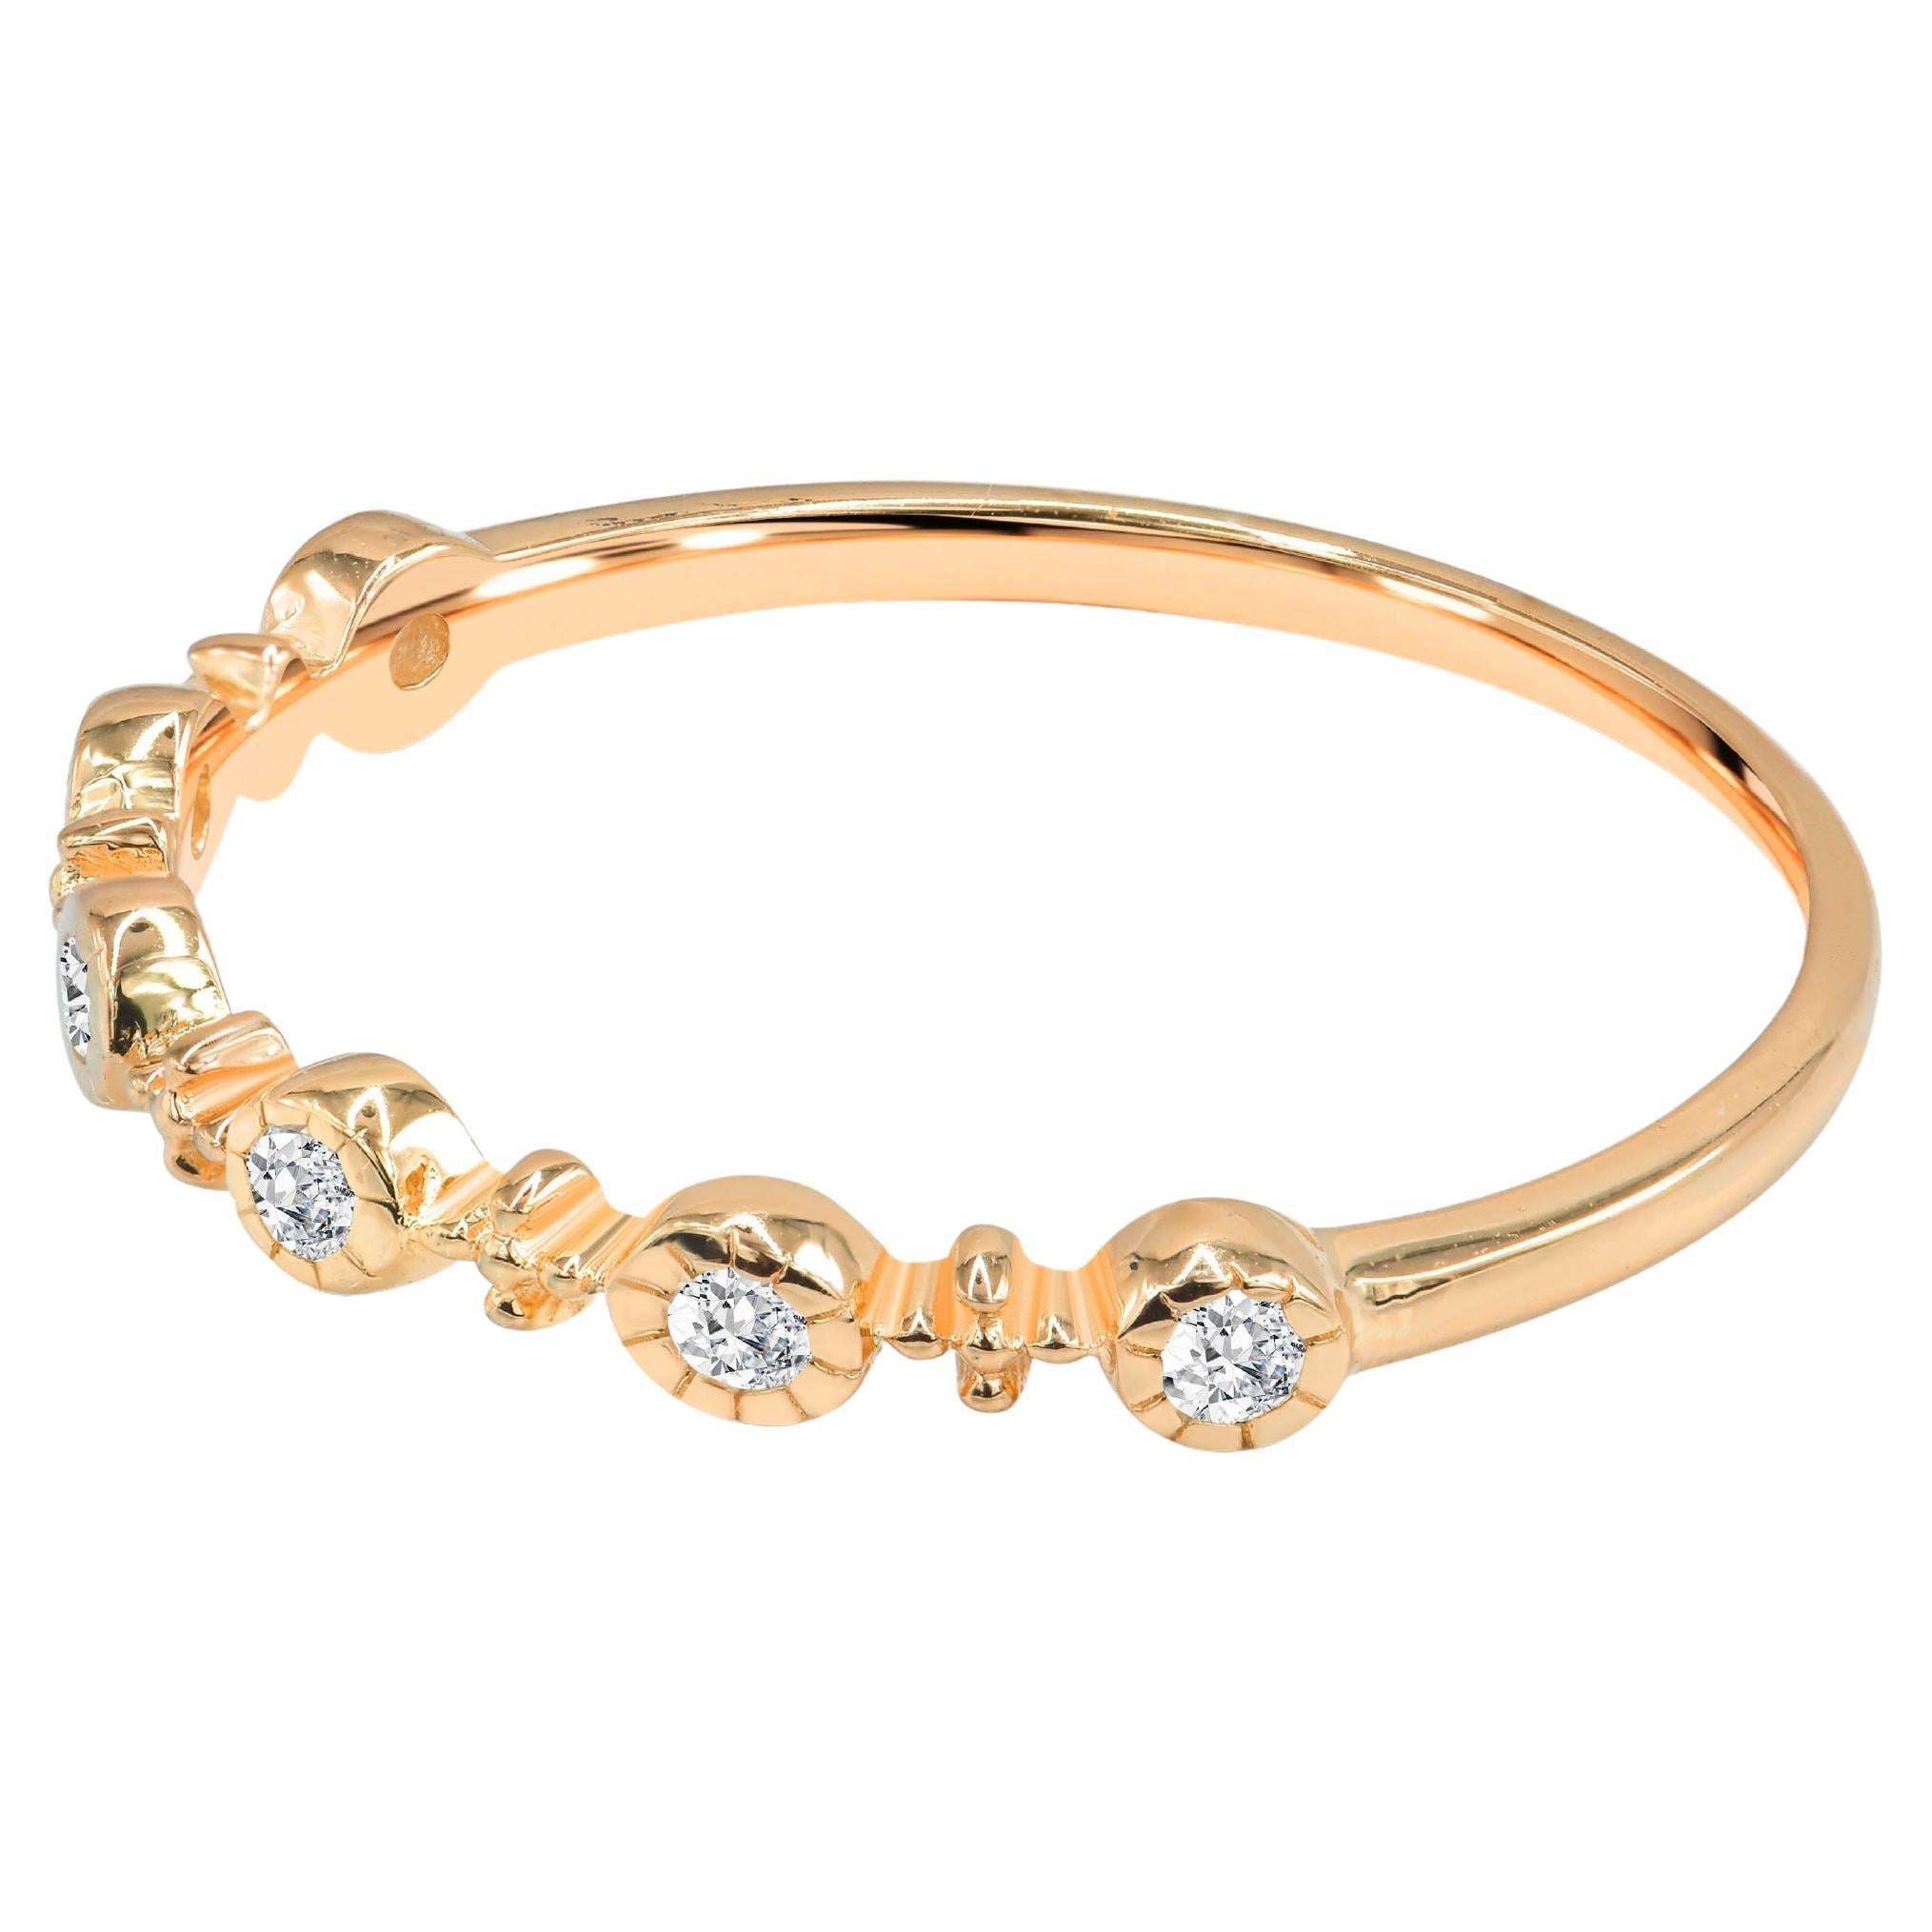 0.21 Carat Diamond Wedding Ring in 18K Yellow Gold For Sale at 1stDibs ...